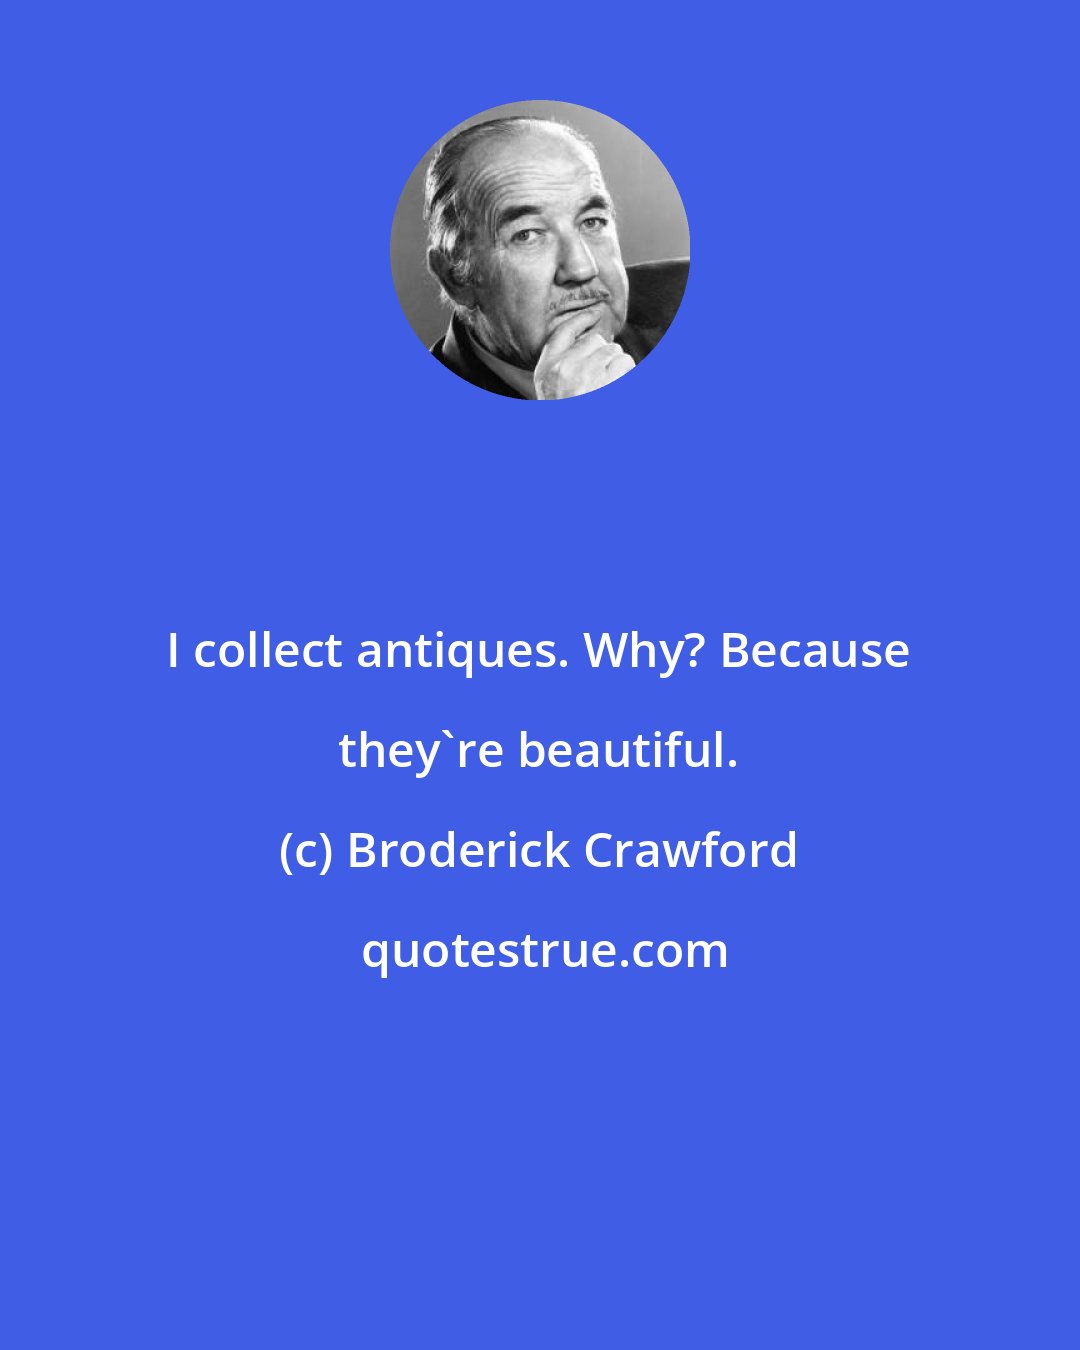 Broderick Crawford: I collect antiques. Why? Because they're beautiful.